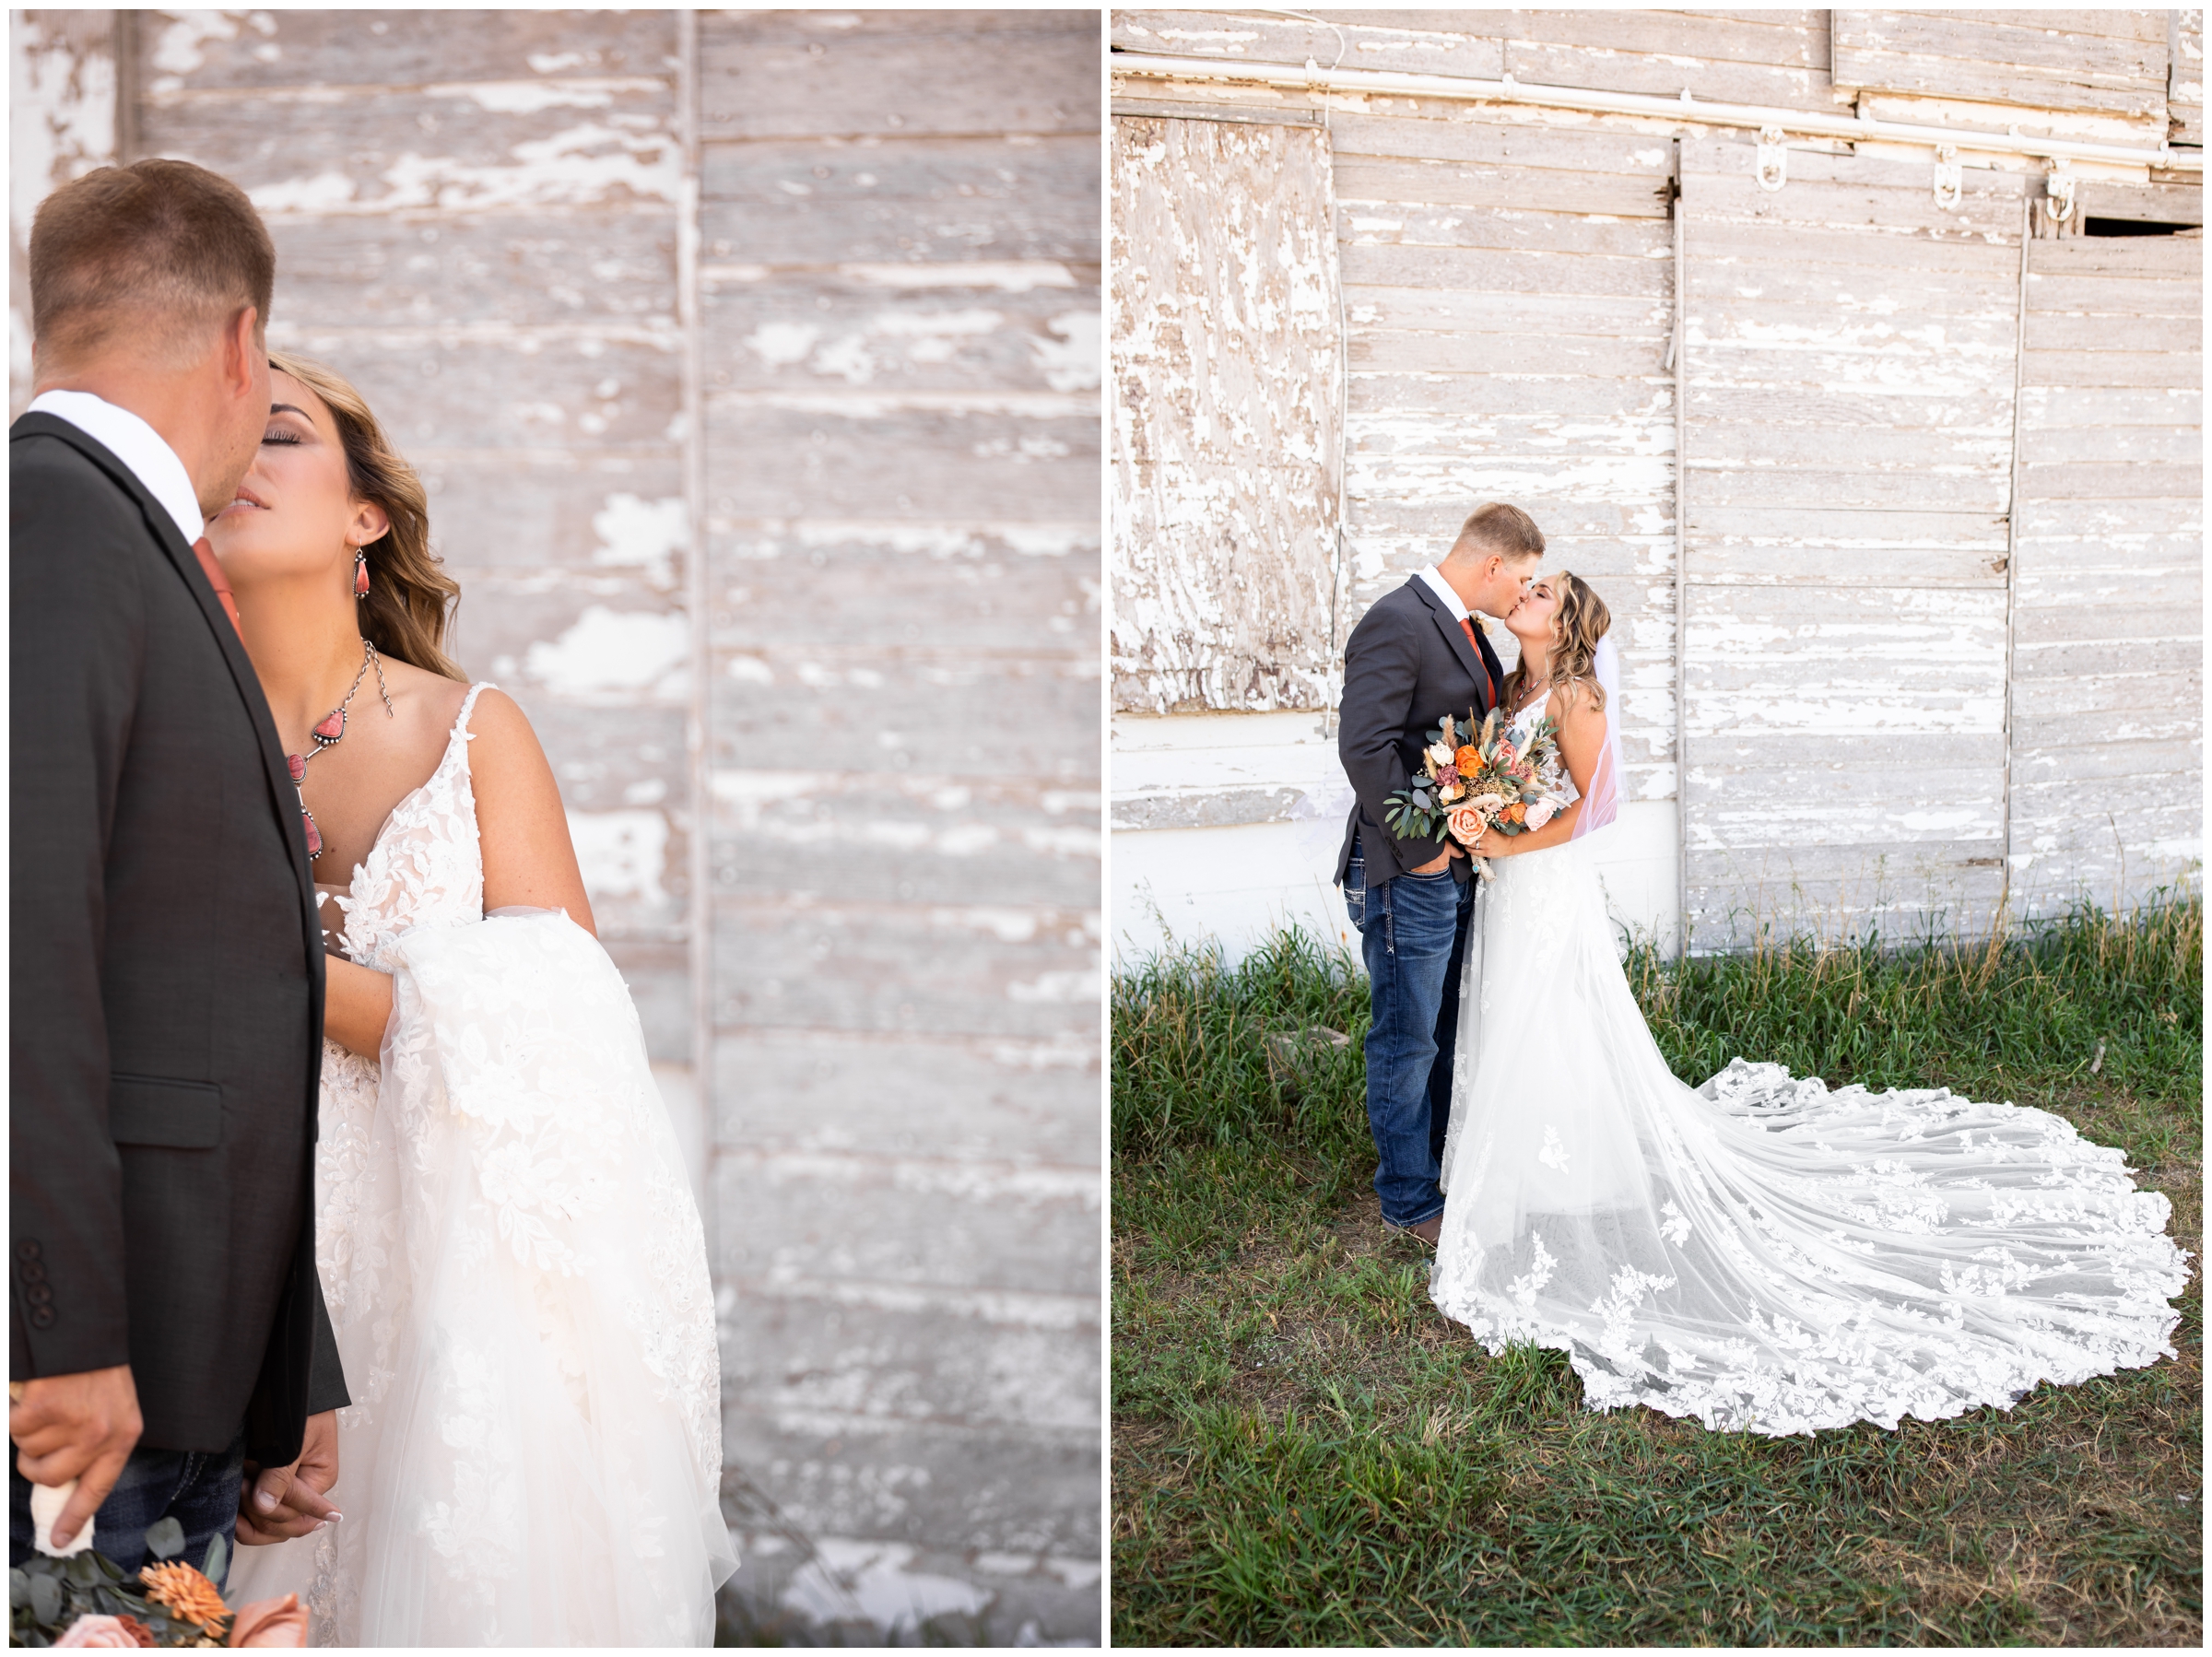 couple kissing in front of barn during rustic Colorado wedding pictures by Plum Pretty Photography 